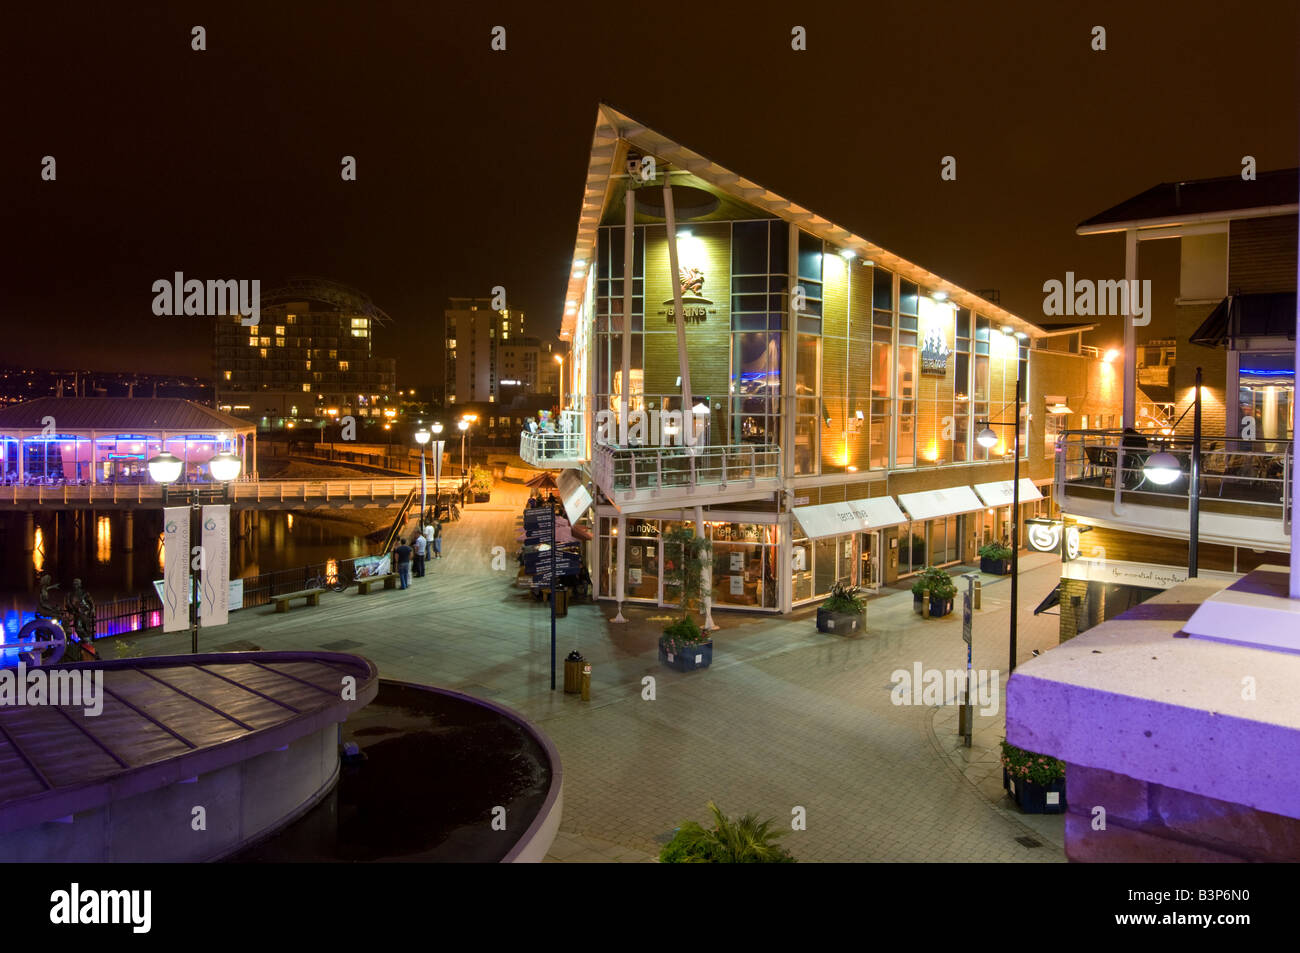 pubs bars and restaurant on Mermaid Quay Cardiff bay at night Wales UK Stock Photo